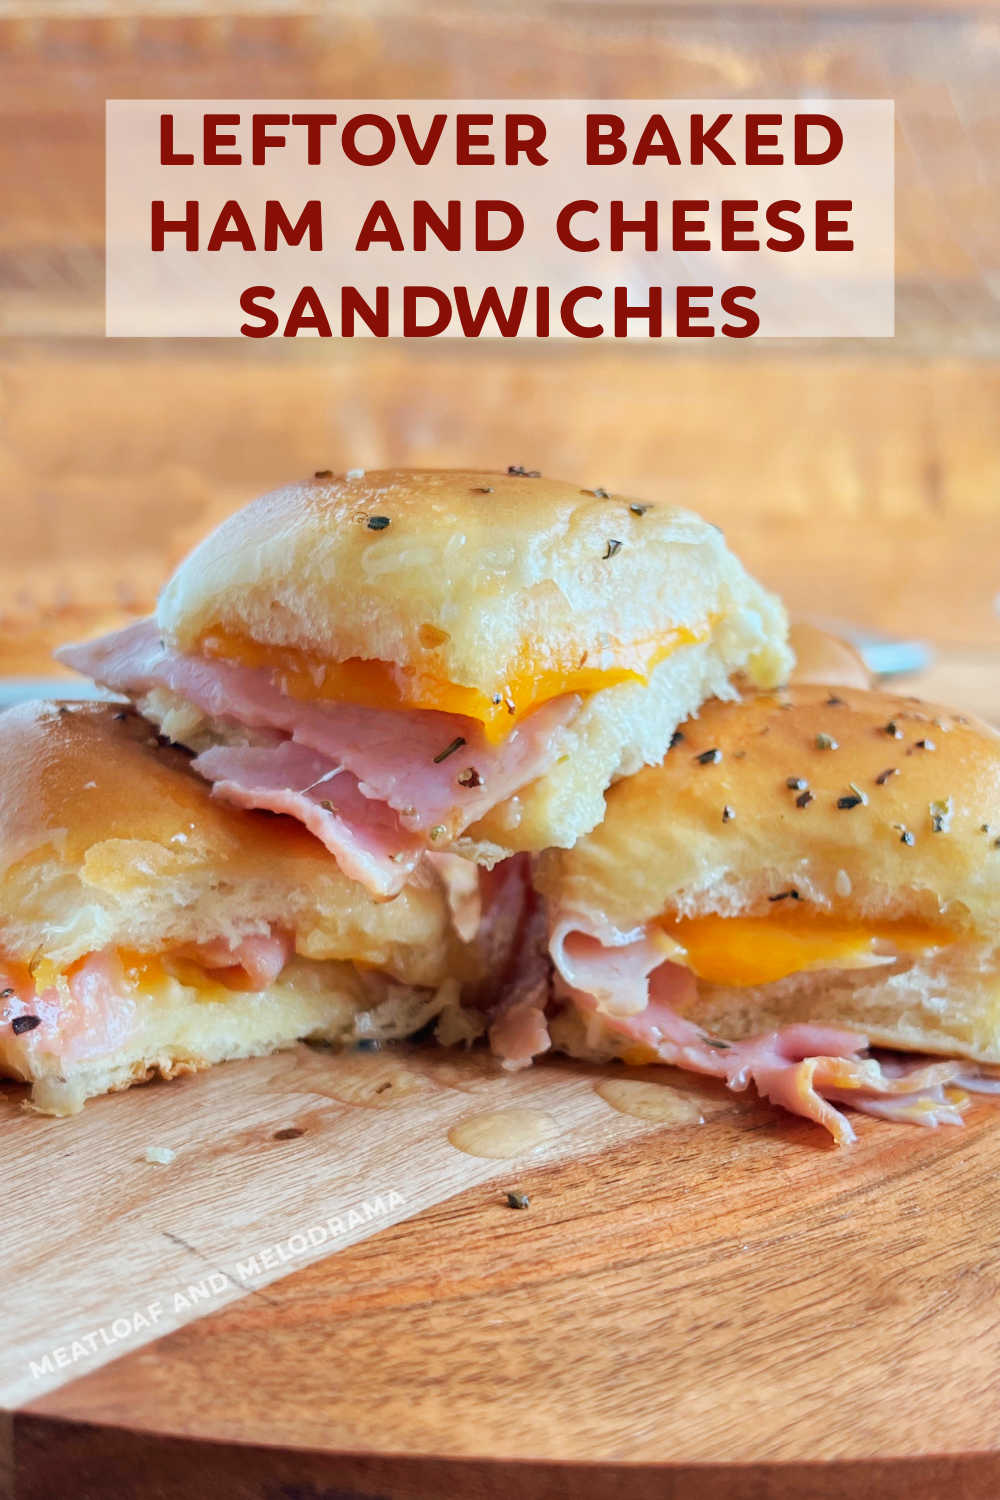 This leftover ham sandwich made with spiral ham slices and cheddar cheese baked in buttery soft rolls is an easy and delicious way to use up leftover holiday ham. Your whole family will love these hot ham and cheese sliders! via @meamel